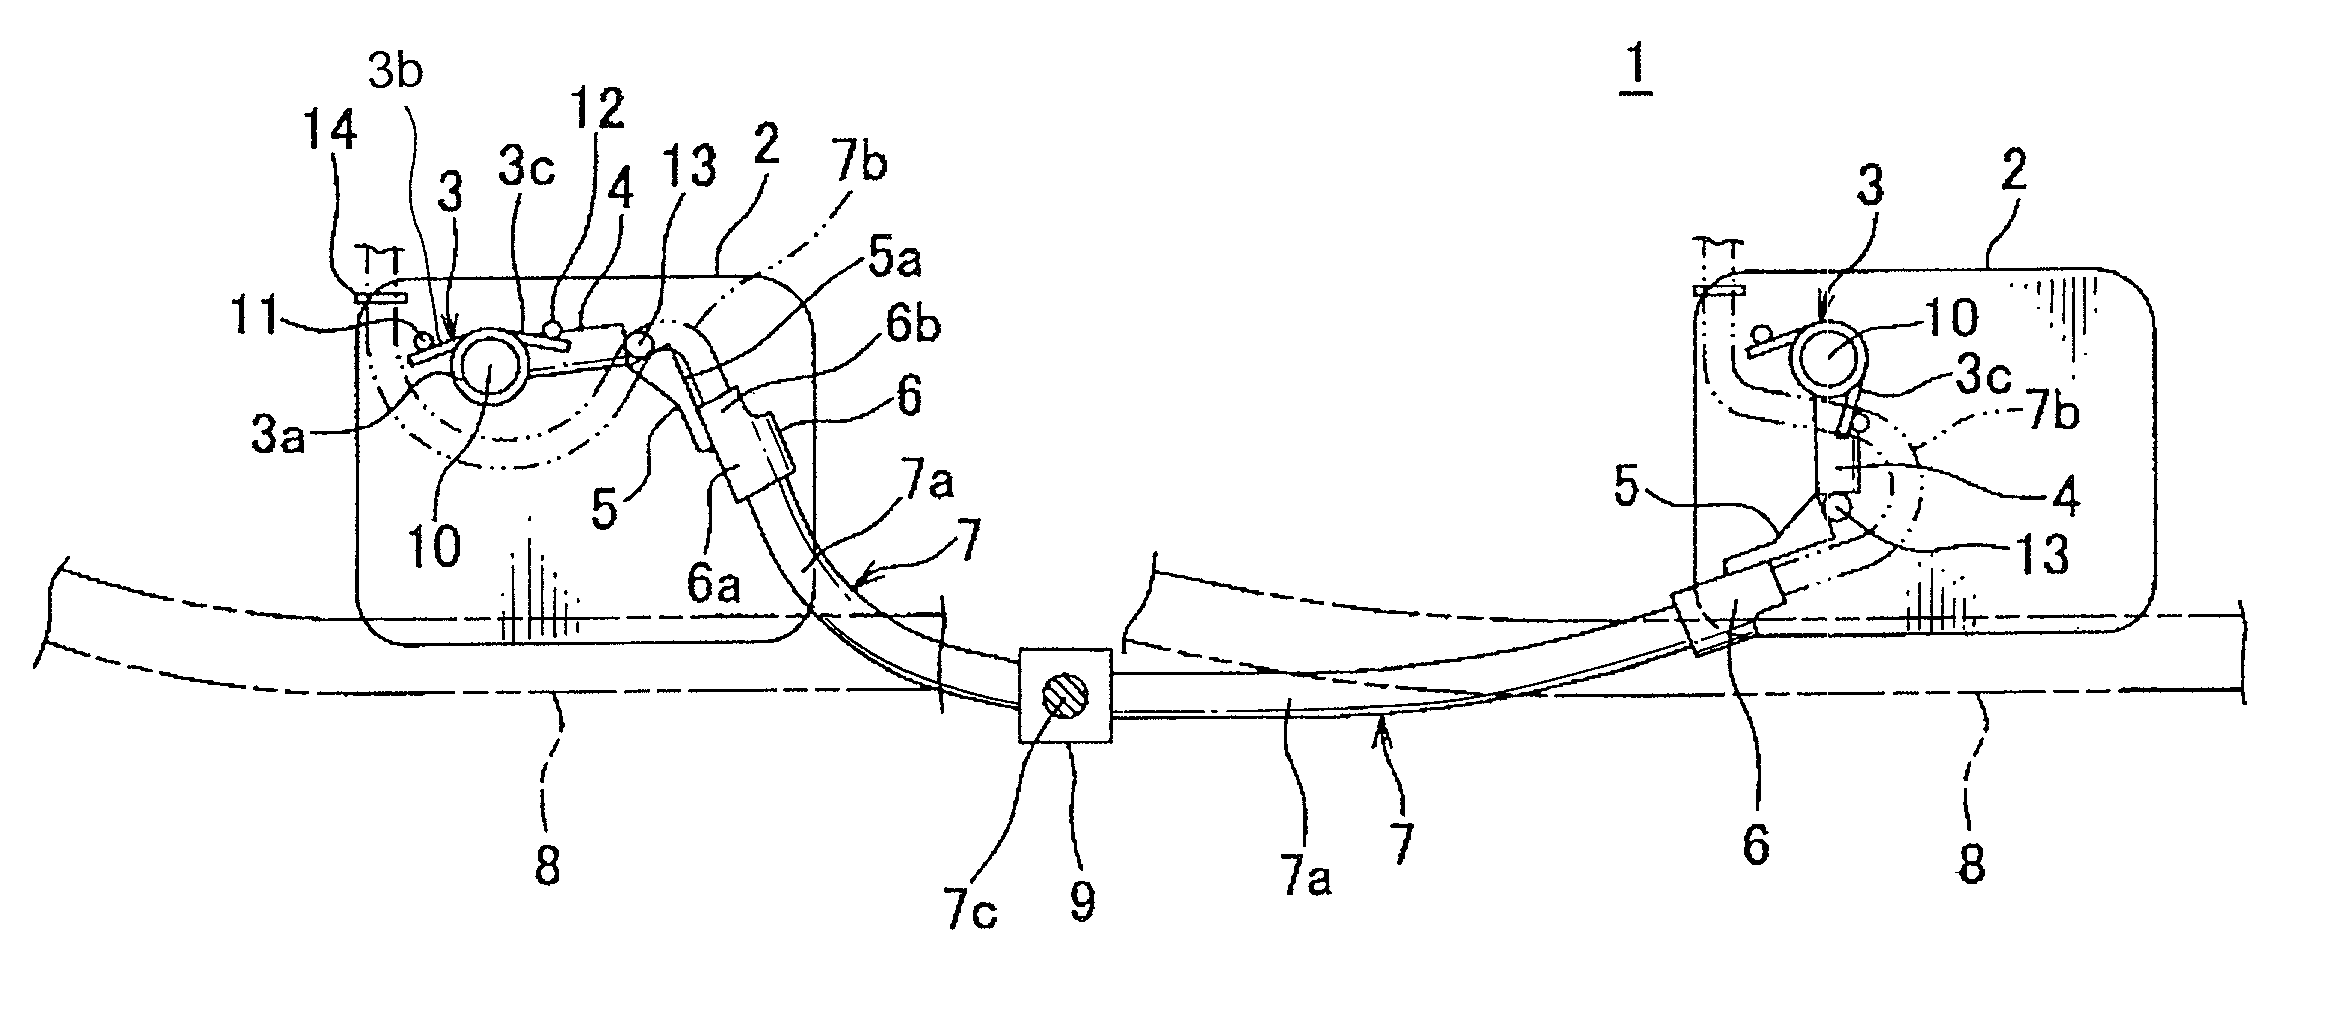 Power supply apparatus for slidable structure